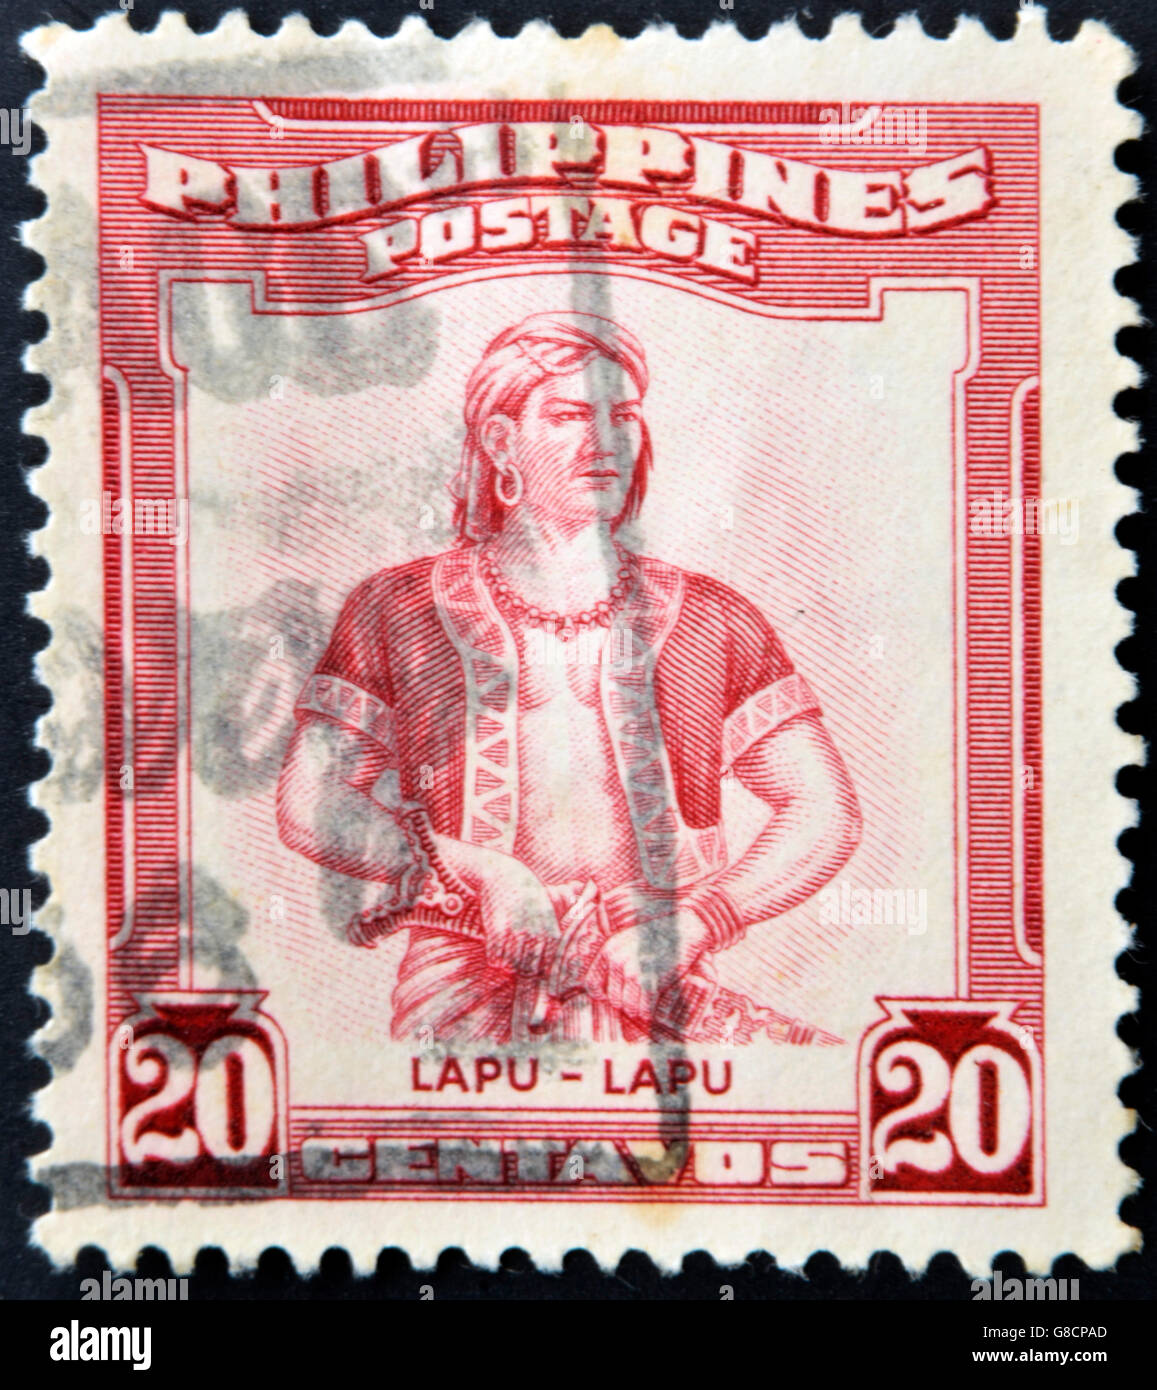 PHILIPPINES - CIRCA 1970: A stamp printed in Philippines shows Lapu-Lapu  was the datu of Mactan, an island in the Visayas in th Stock Photo